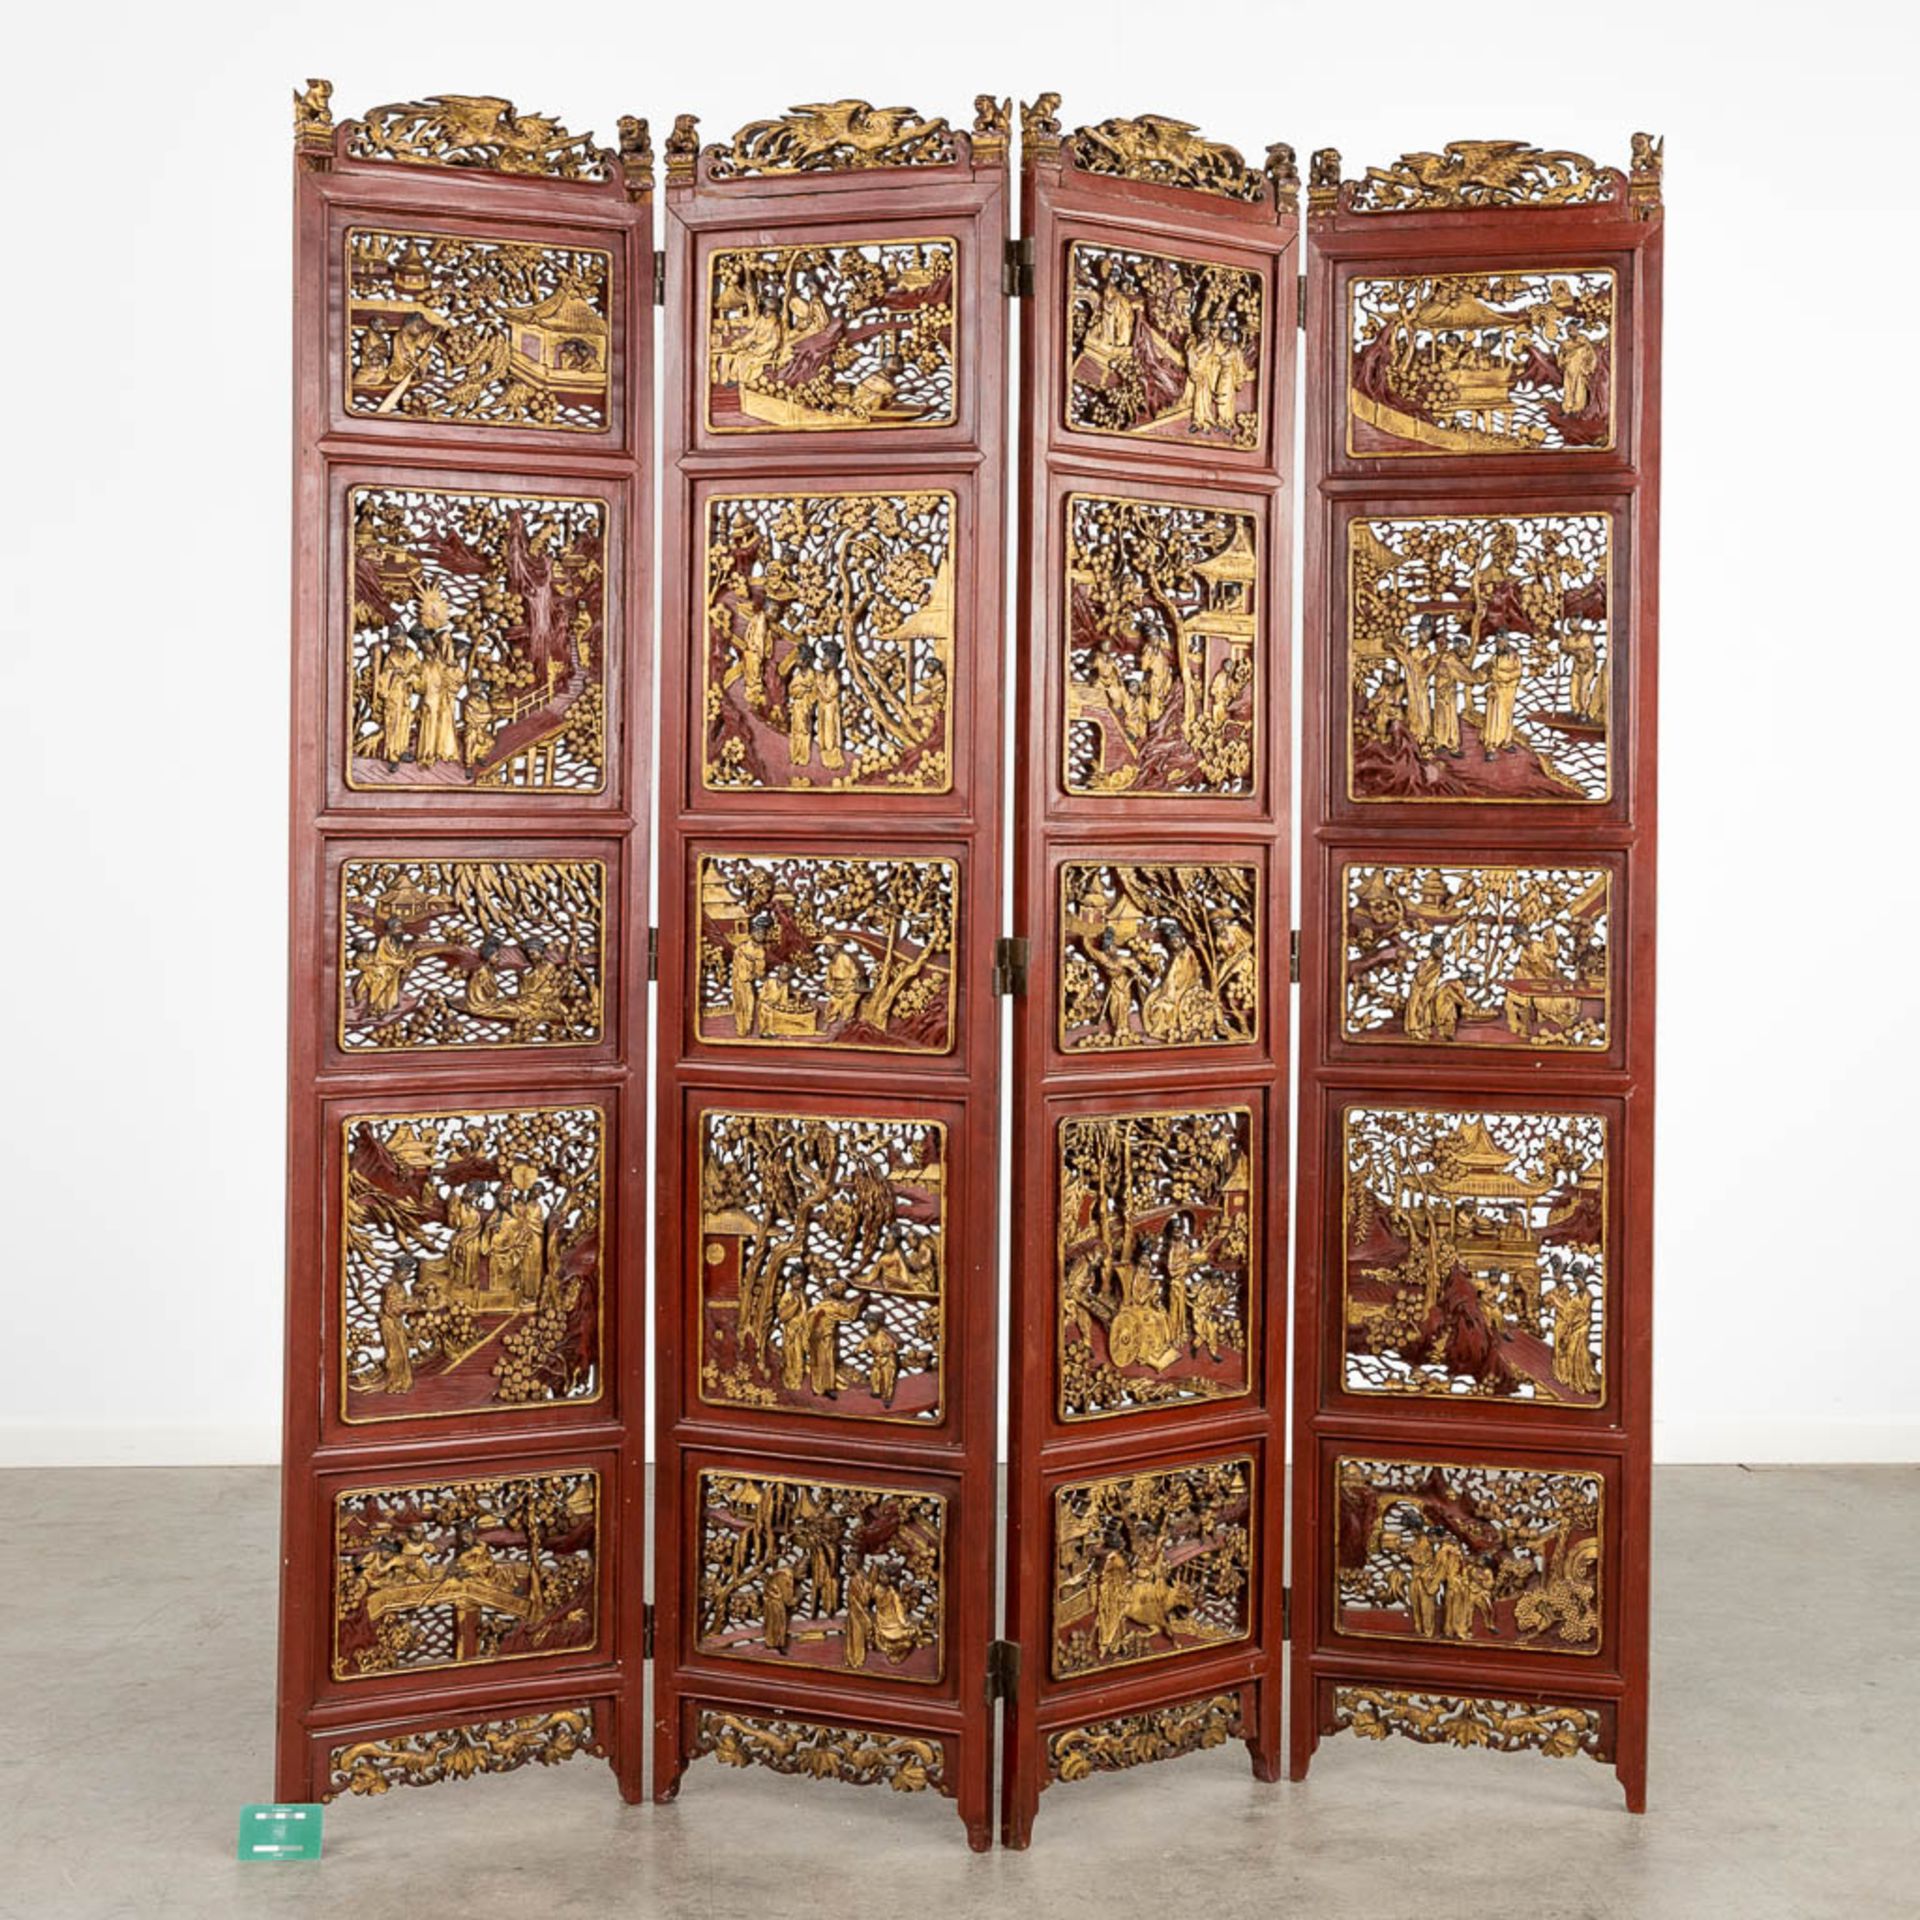 A 4-piece Chinese room divider, sculptured hardwood panels, circa 1900. (W:162 x H:185 cm) - Image 2 of 12